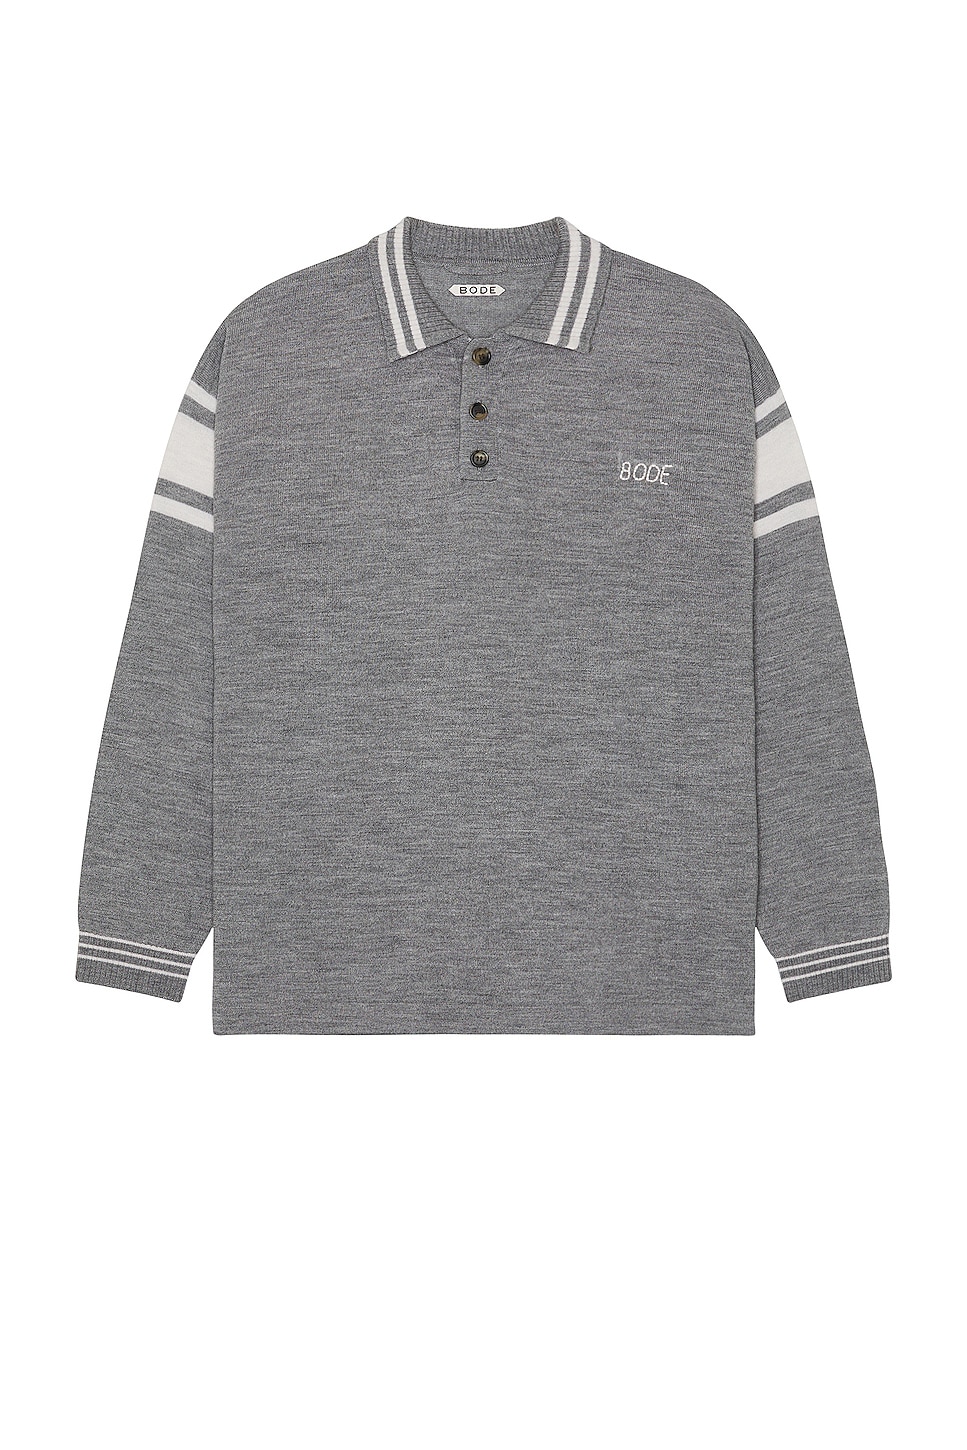 Image 1 of BODE Cycling Polo in Grey & White